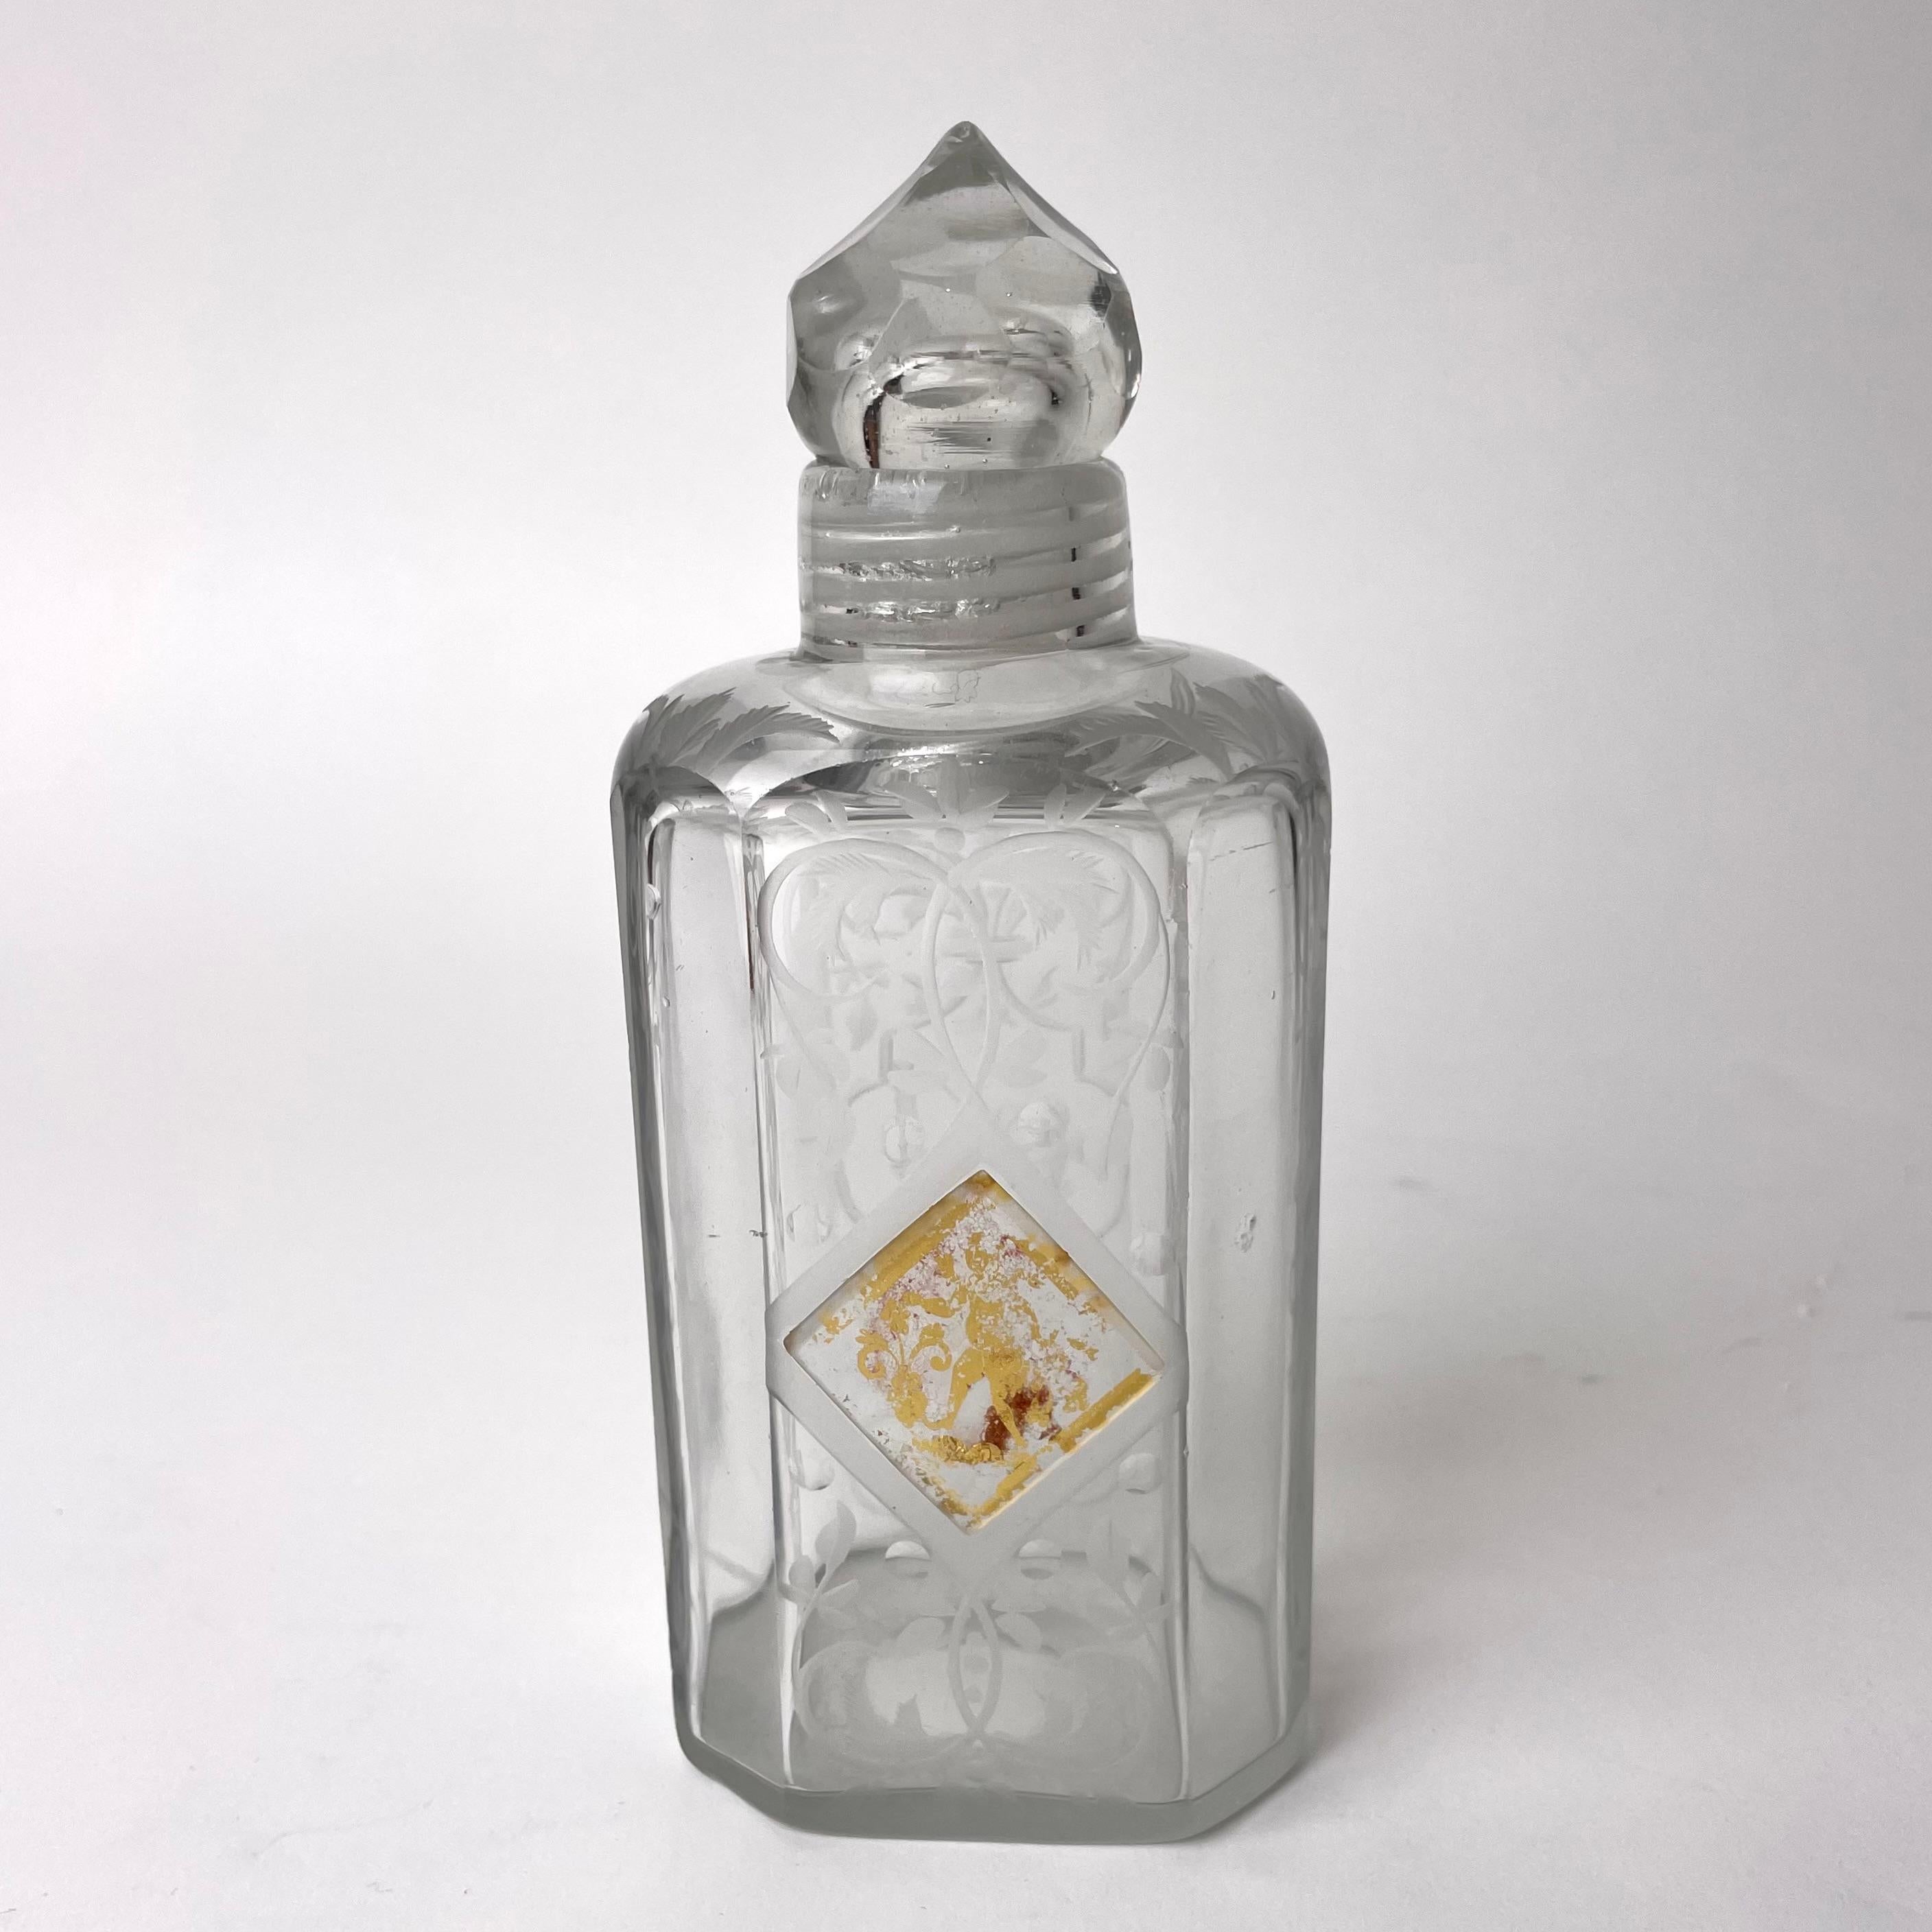 Elegant Glass Bottle with glass screw cap (unusual) probably from the 18th Century. Beautiful engraved with a gilt center sektion on one side. Wear on the guilding (se pictures)

Wear consistent with age and use 